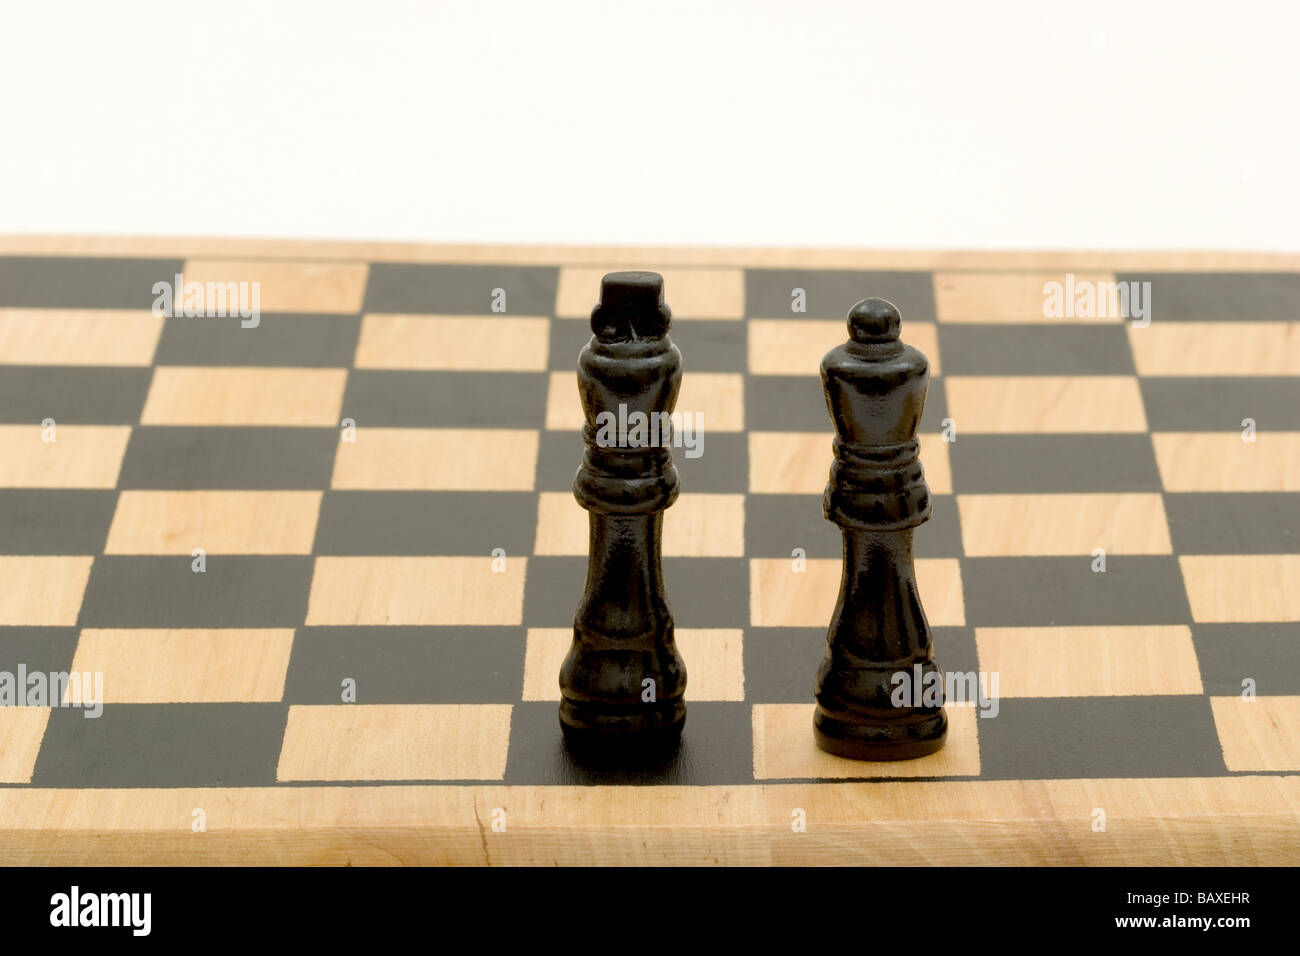 Two chess pieces, one king and one queen, on chess board Stock Photo